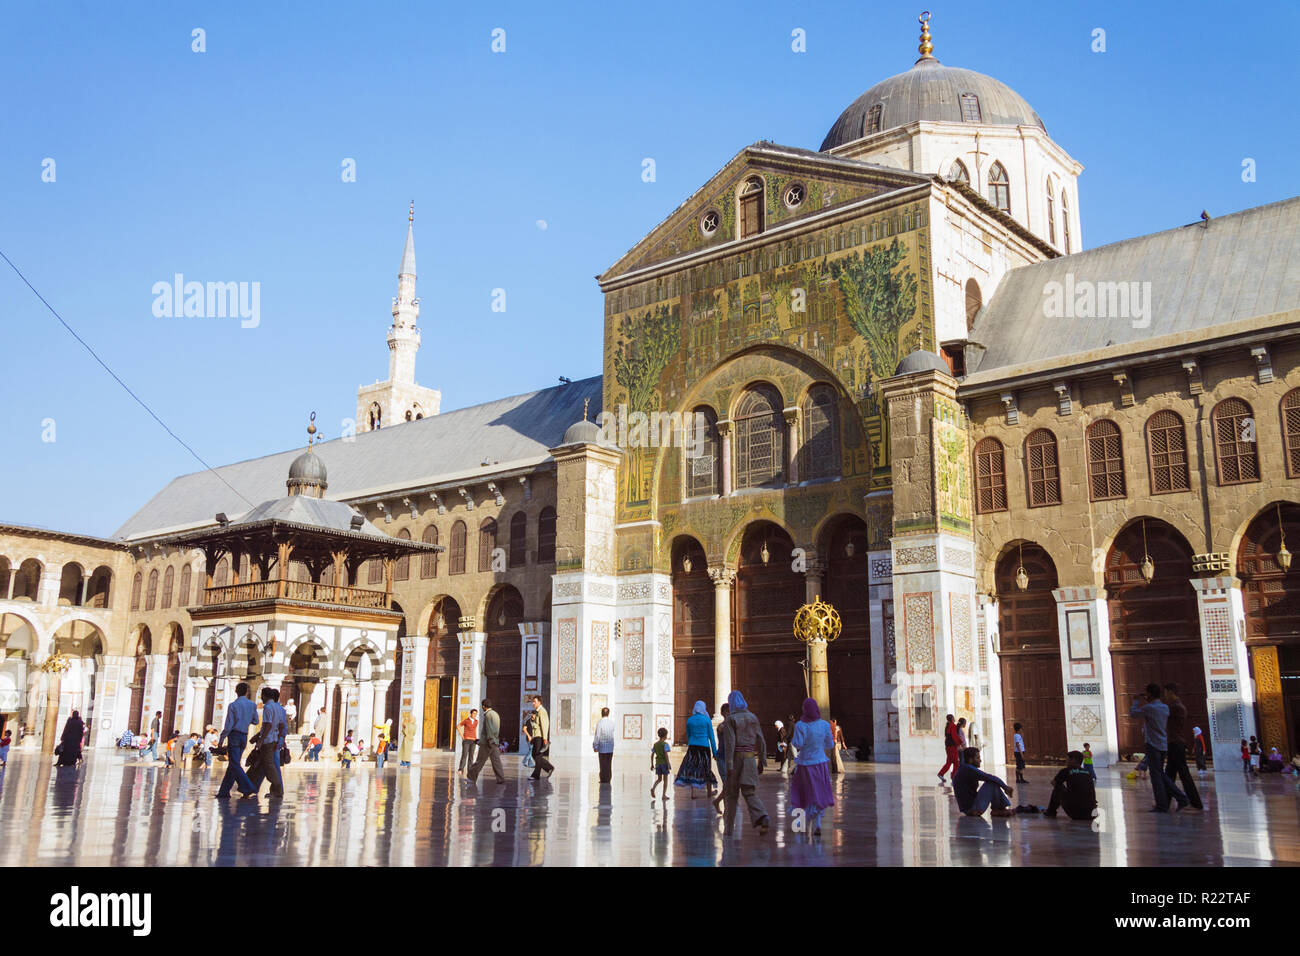 Damascus, Syria : Courtyard of the Umayyad Great Mosque of Damascus one of the largest and oldest in the world. Incidental people in background. Stock Photo